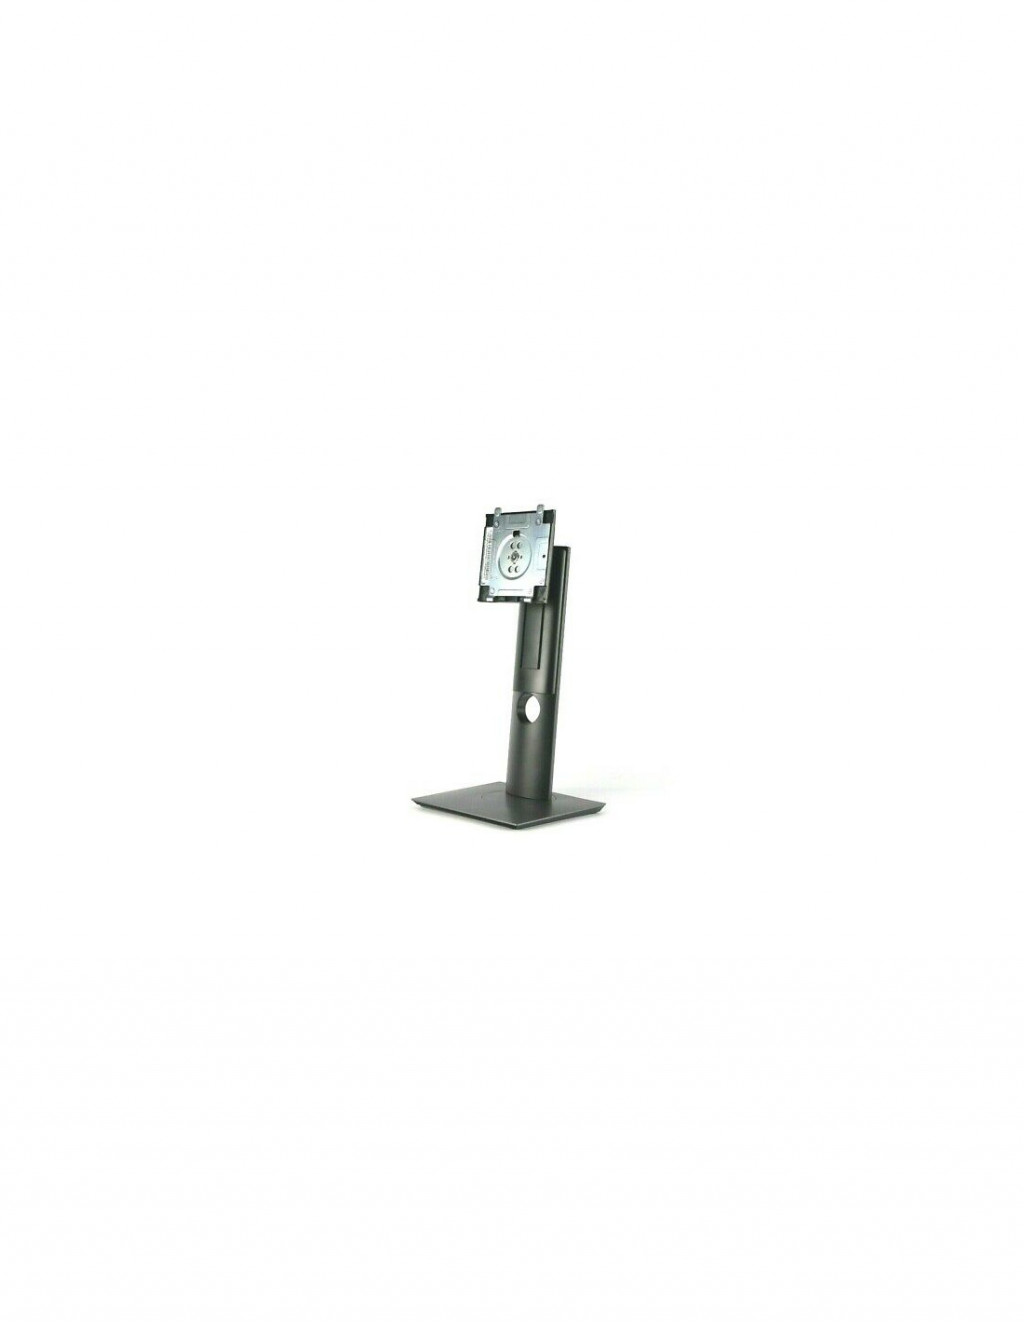 Dell LCD Standard P series Stand